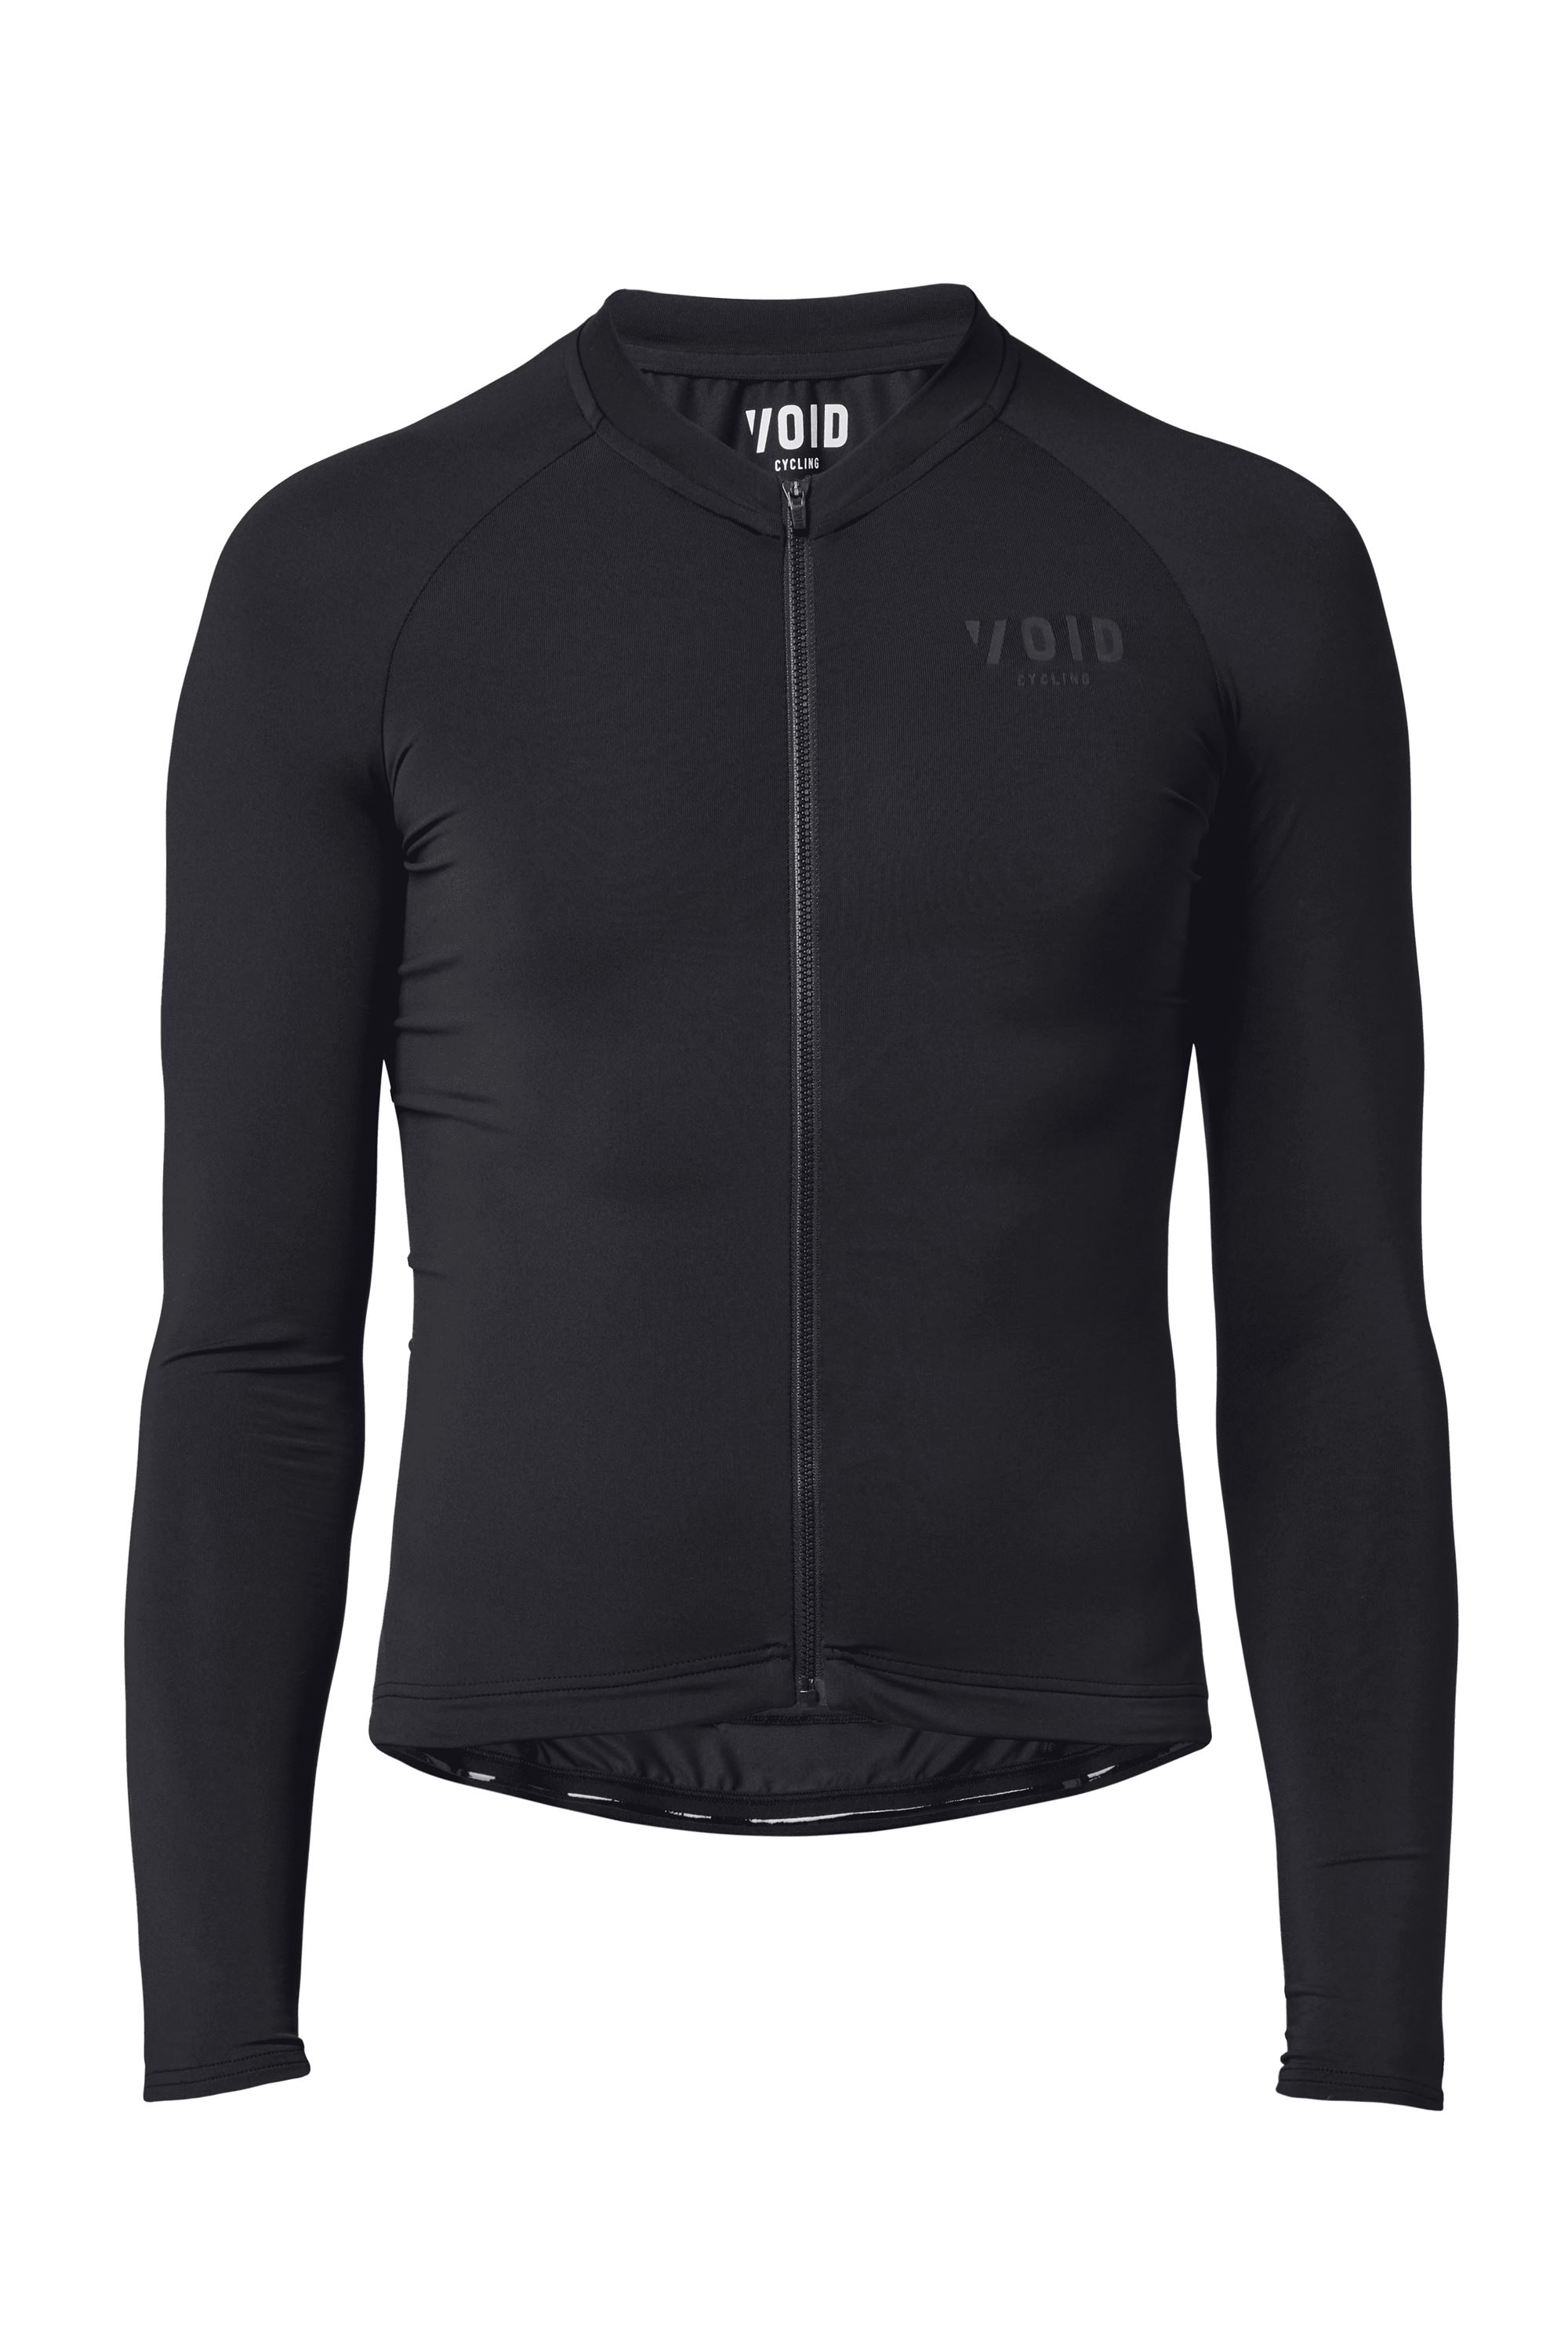 VOID LONG SLEEVE PURE JERSEY BLACK